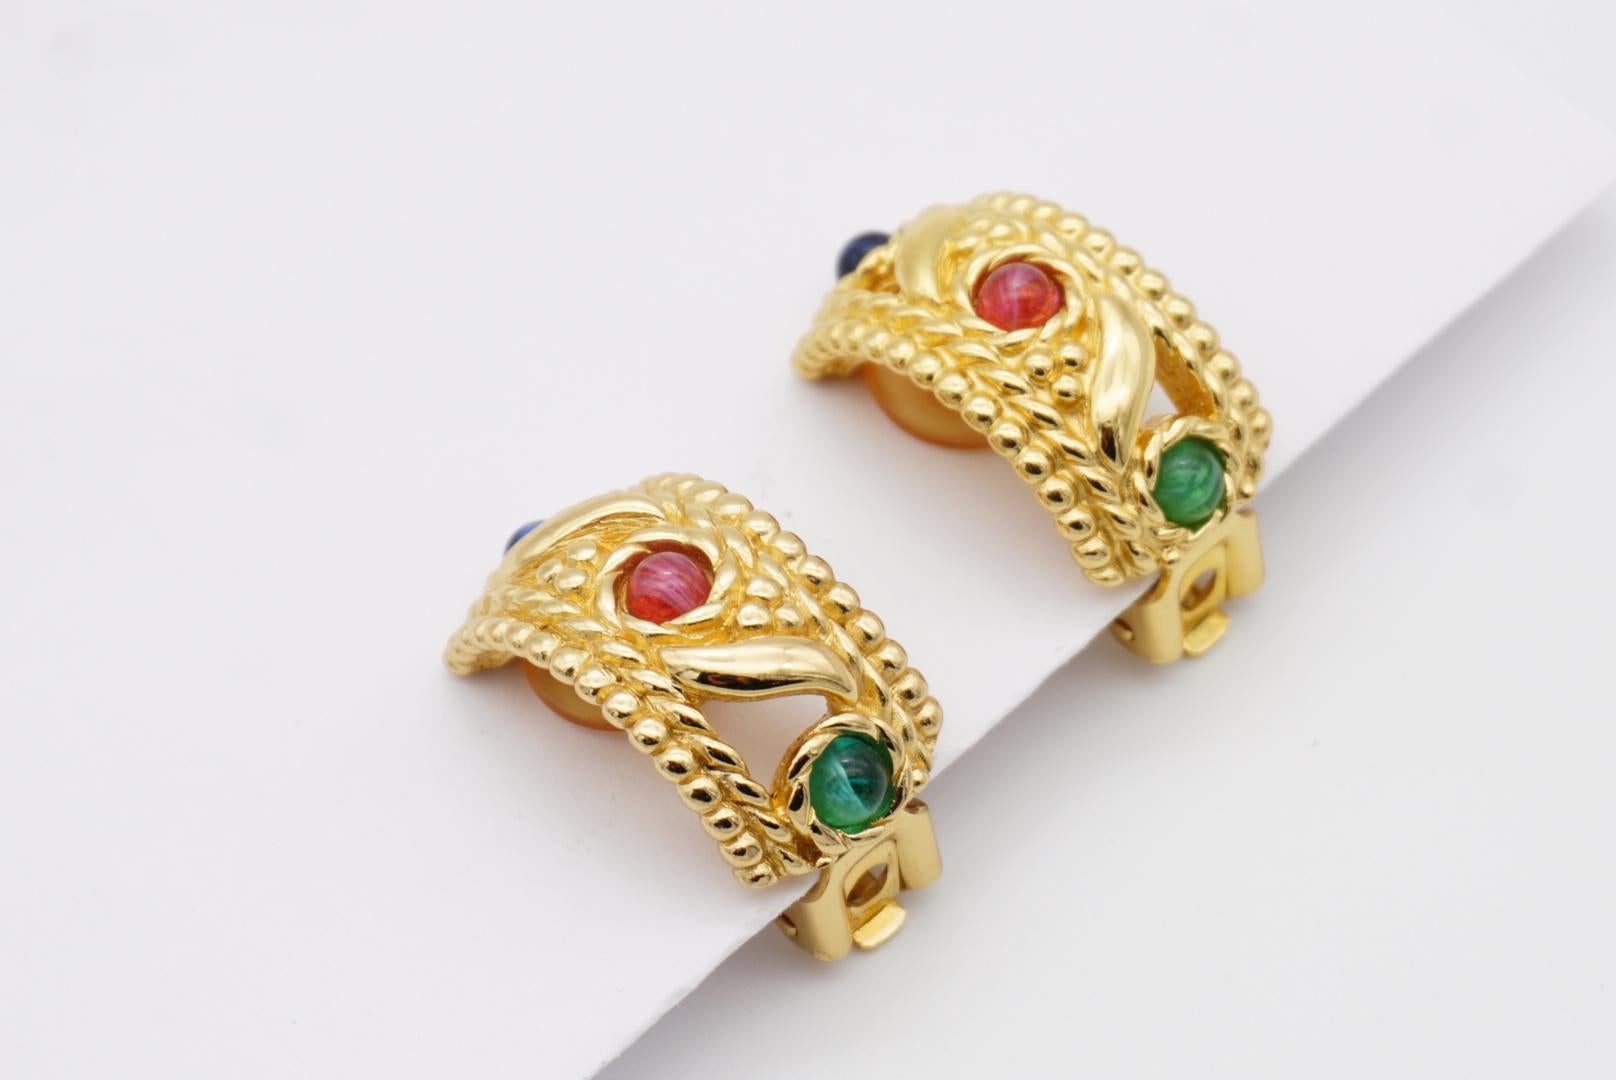 Christian Dior Vintage 1970s Baroque Gripoix Emerald Sapphire Ruby Clip Earrings For Sale 4